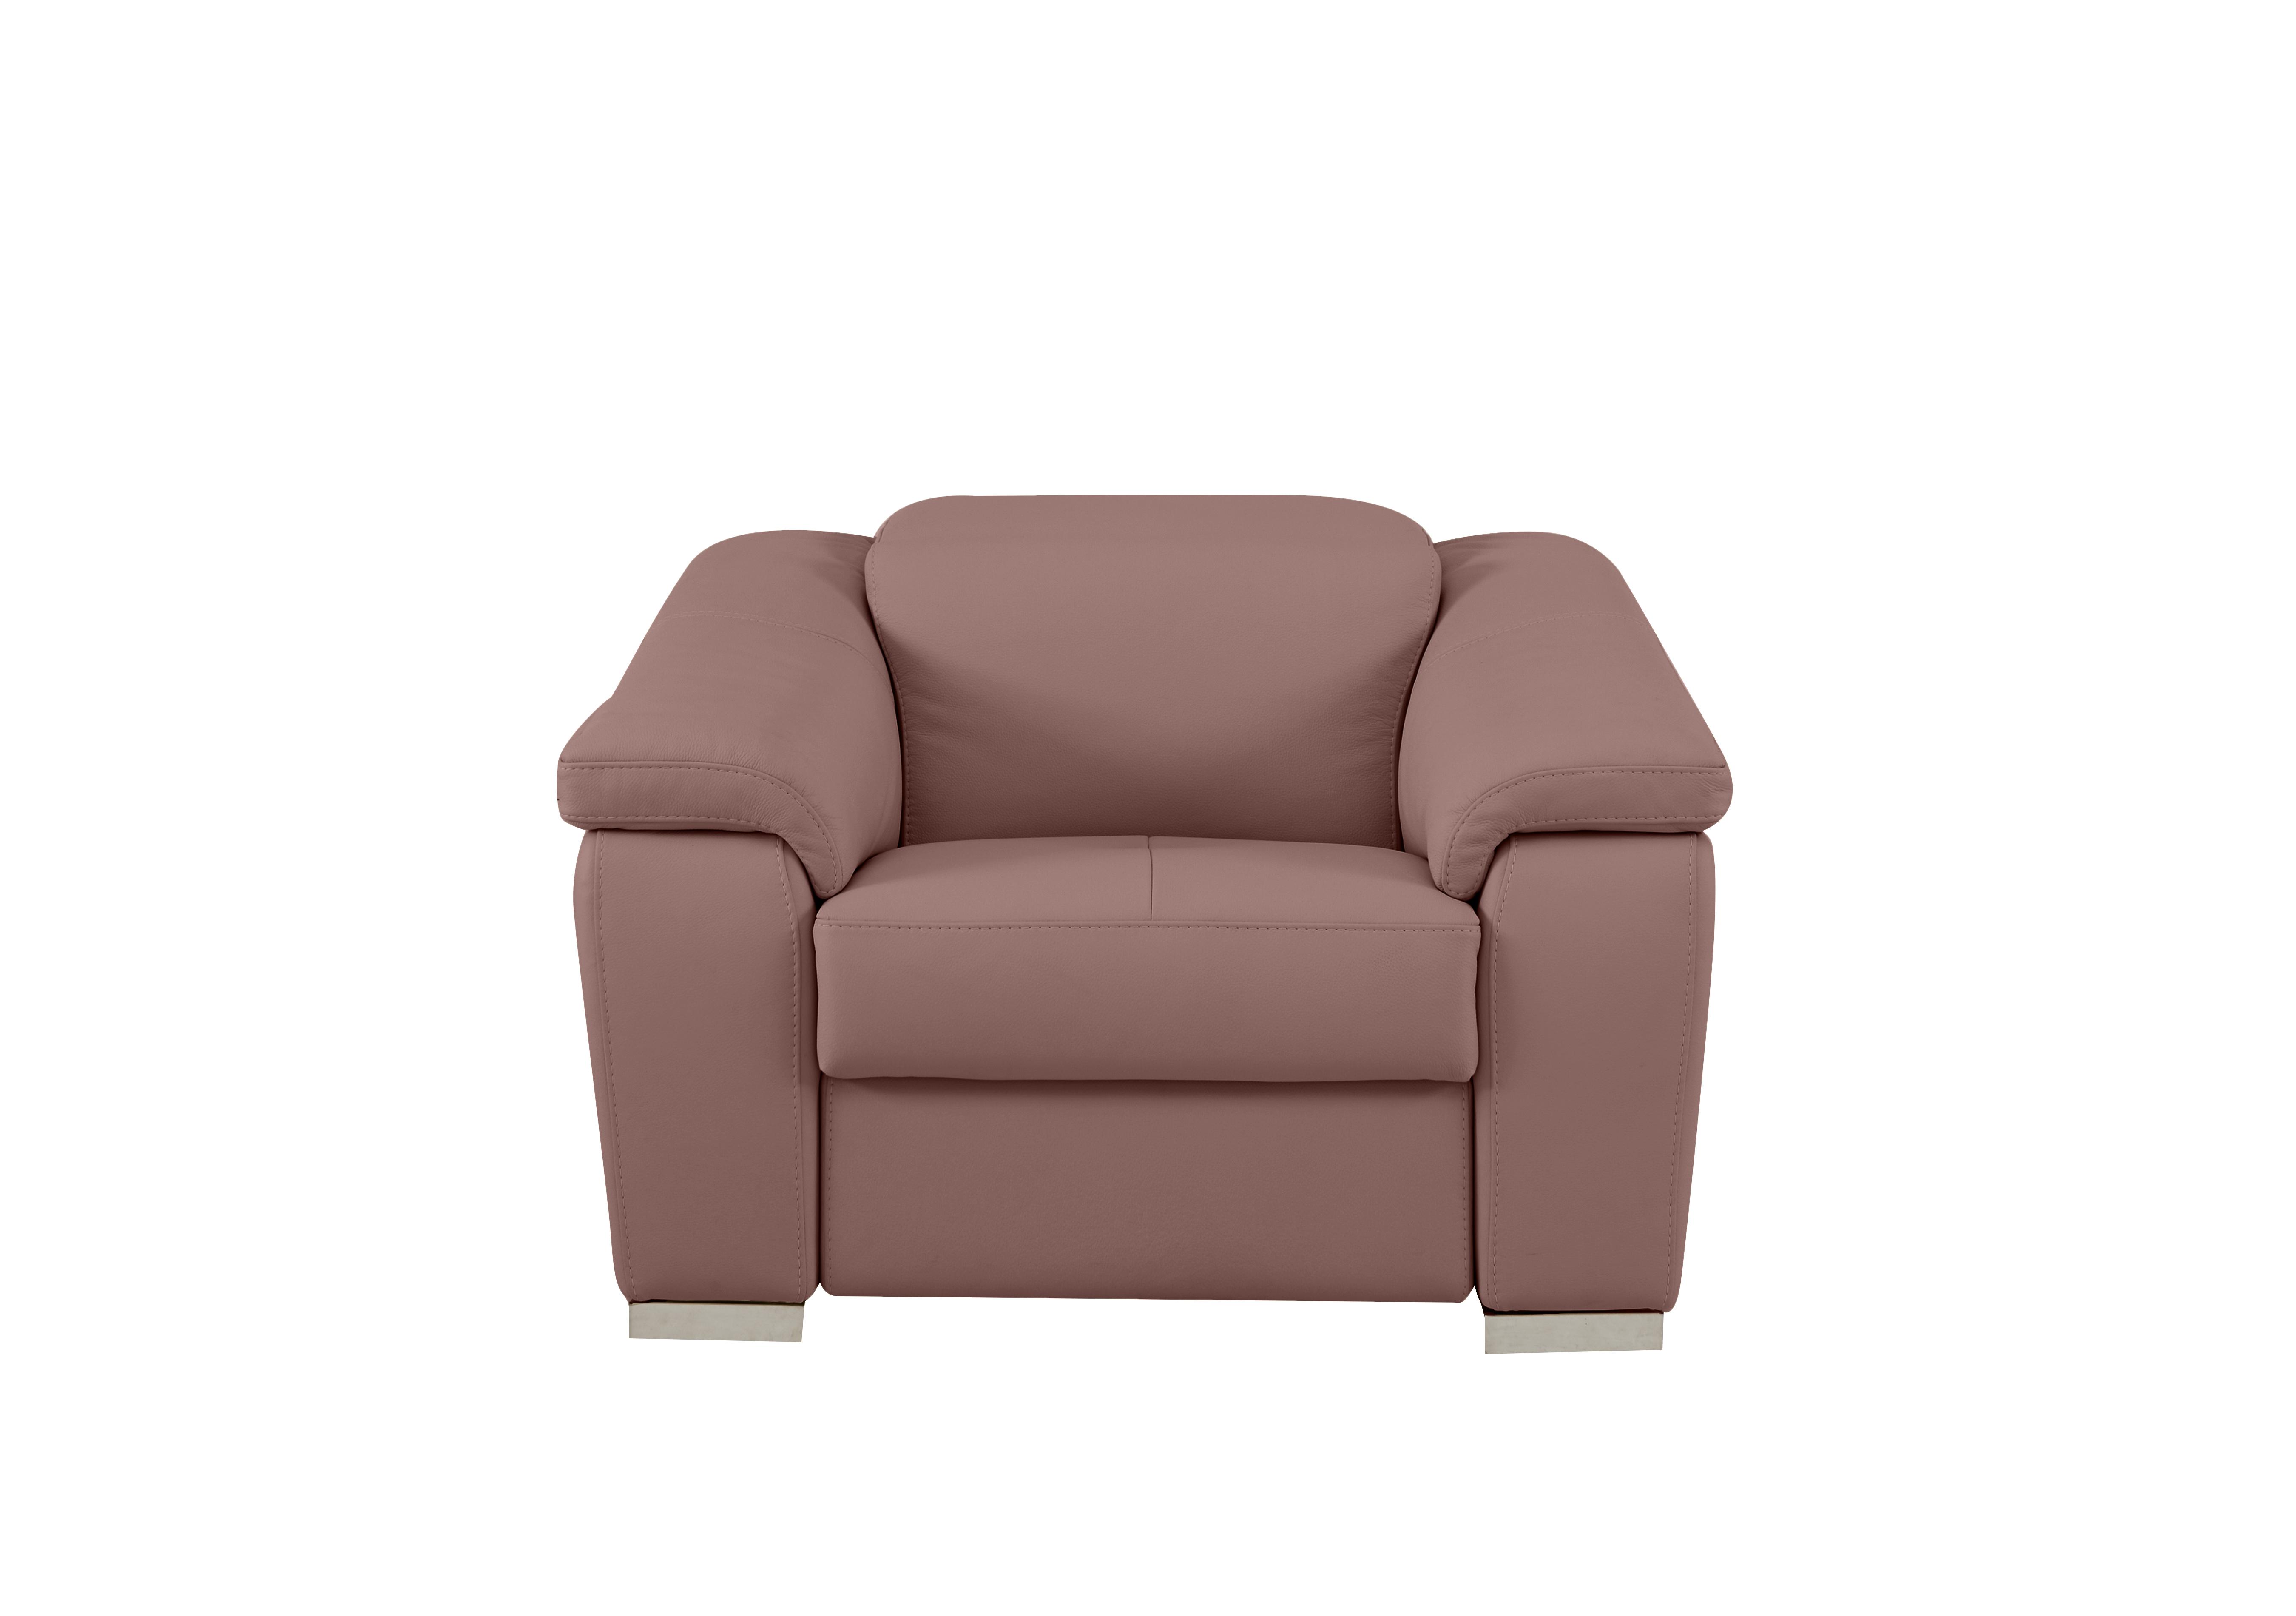 Galileo Leather Armchair in Botero Cipria 2160 Ch on Furniture Village